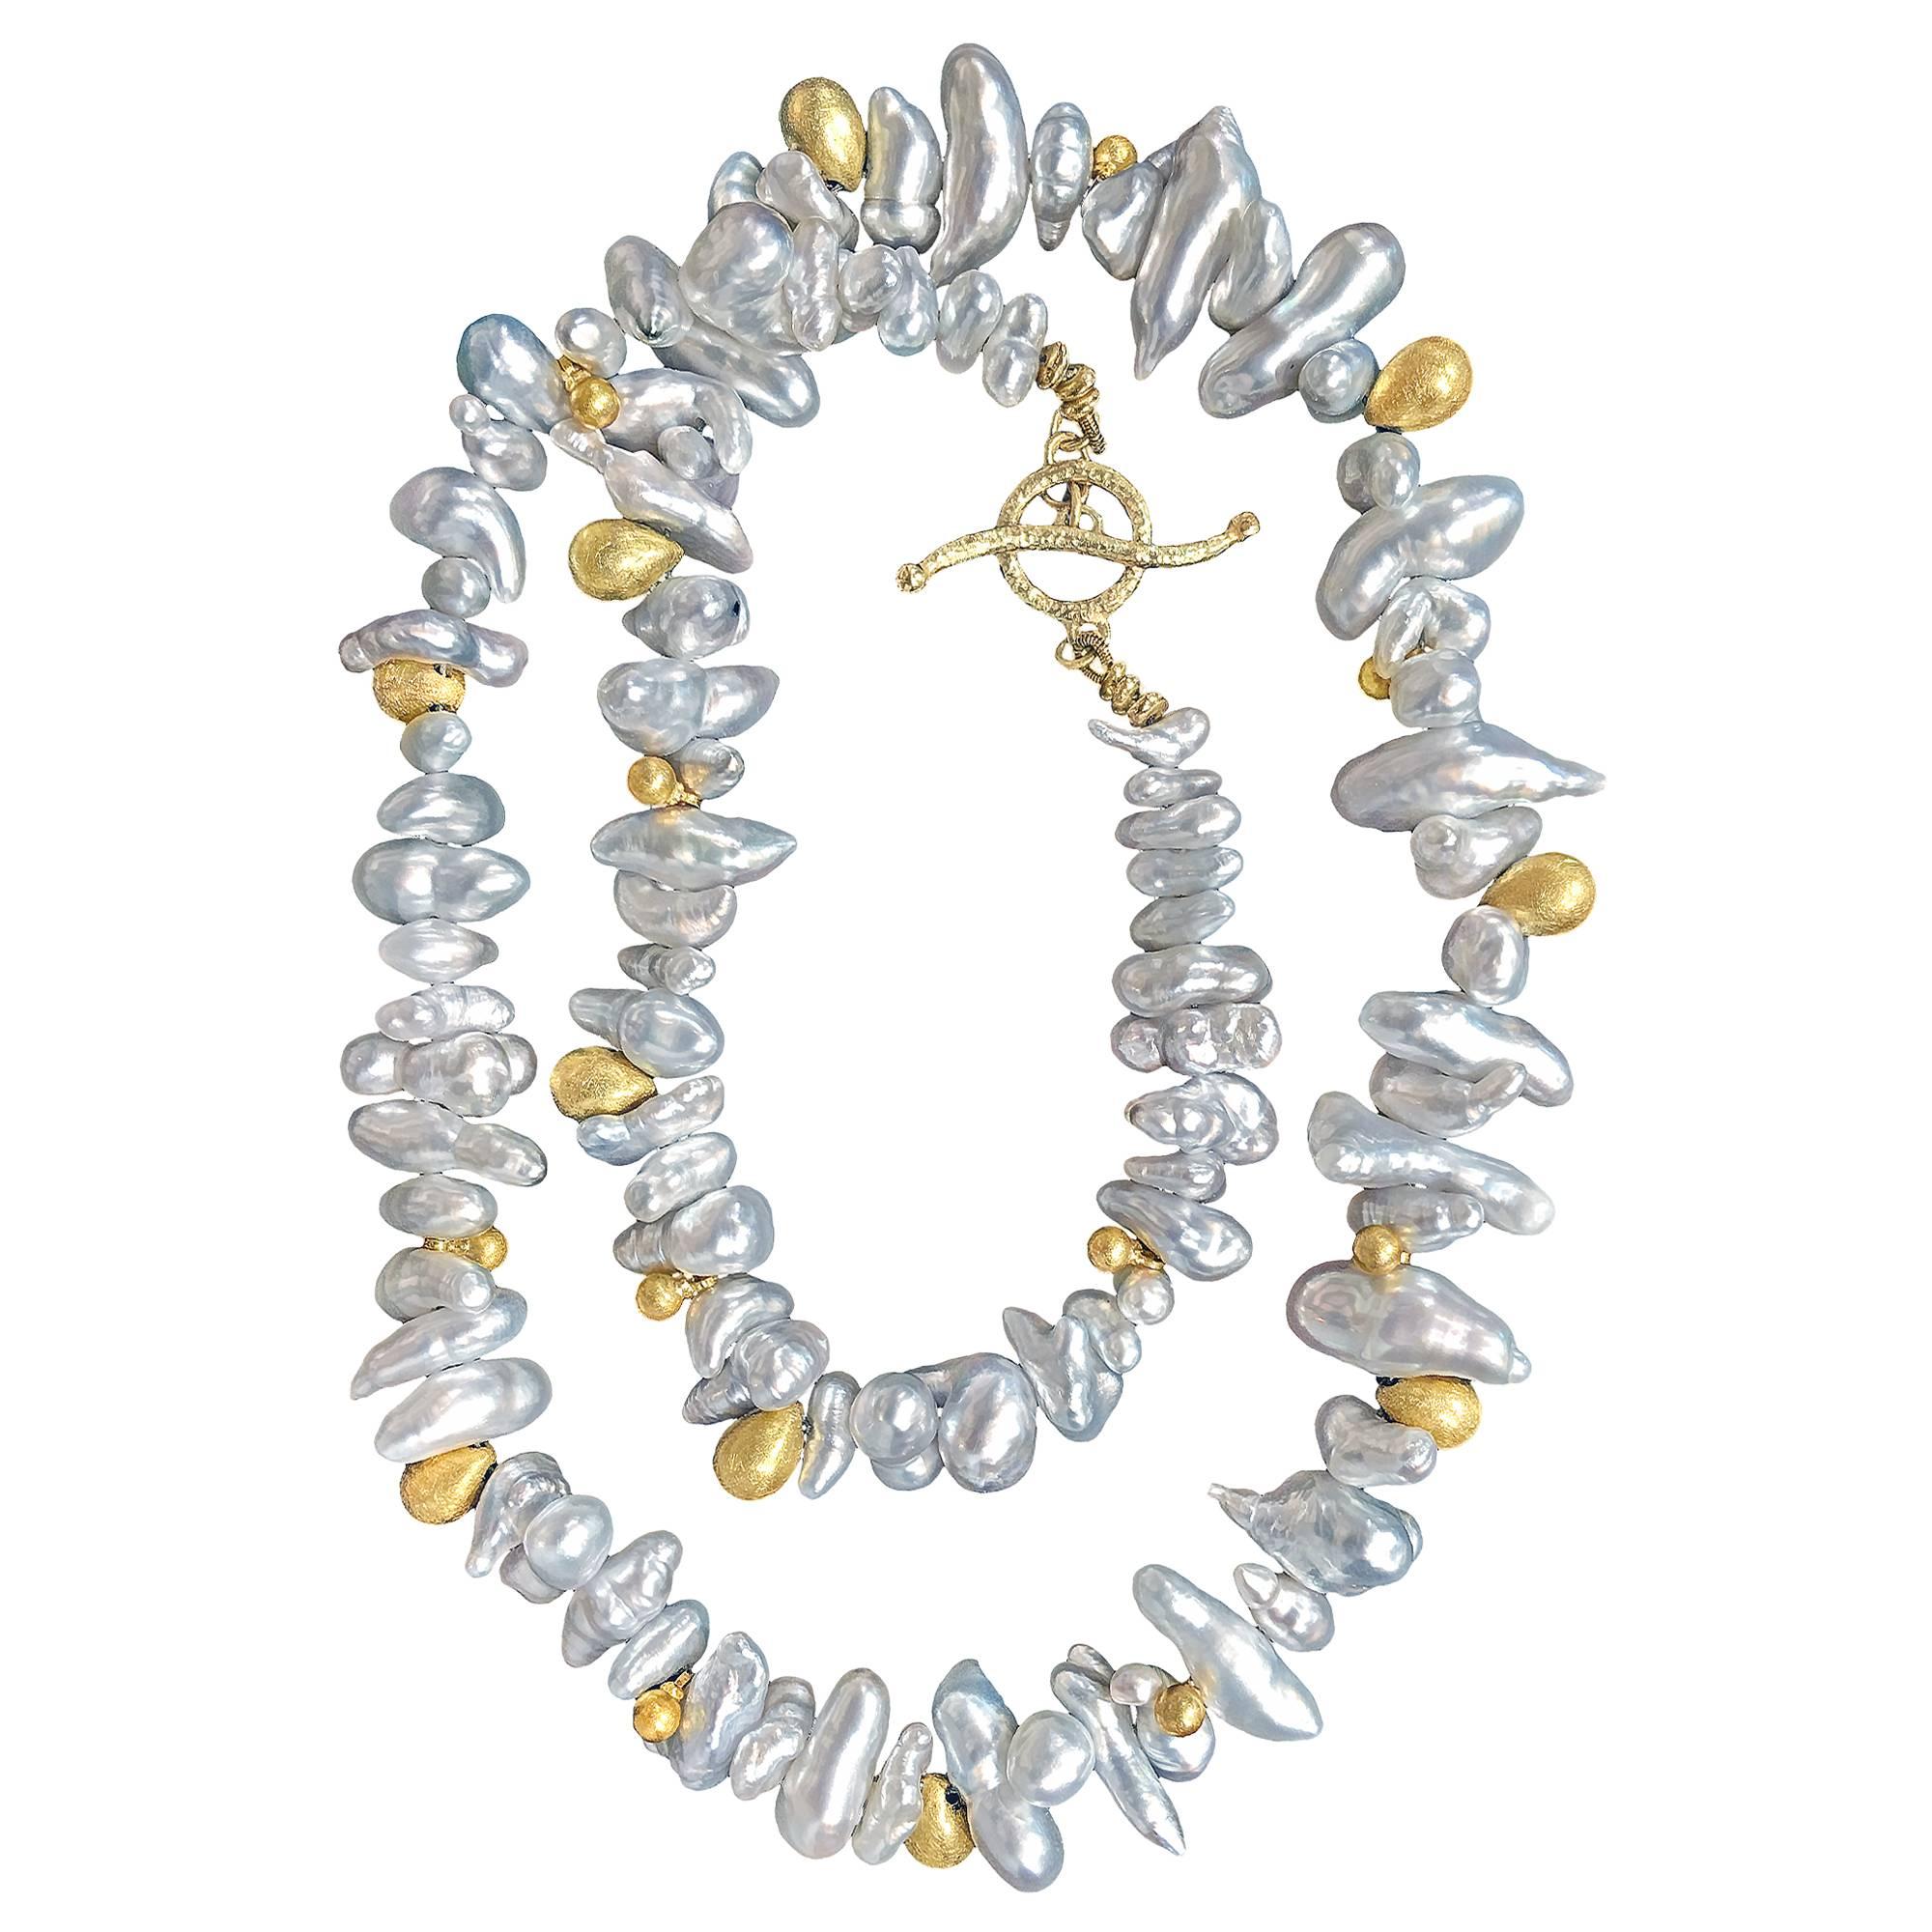 One of a Kind Necklace handcrafted by award-winning jewelry designer Barbara Heinrich featuring a spectacular strand of lustrous bluish silver keshi pearls accented with assorted solid 18k gold drop elements and a handmade wavy toggle clasp. Stamped